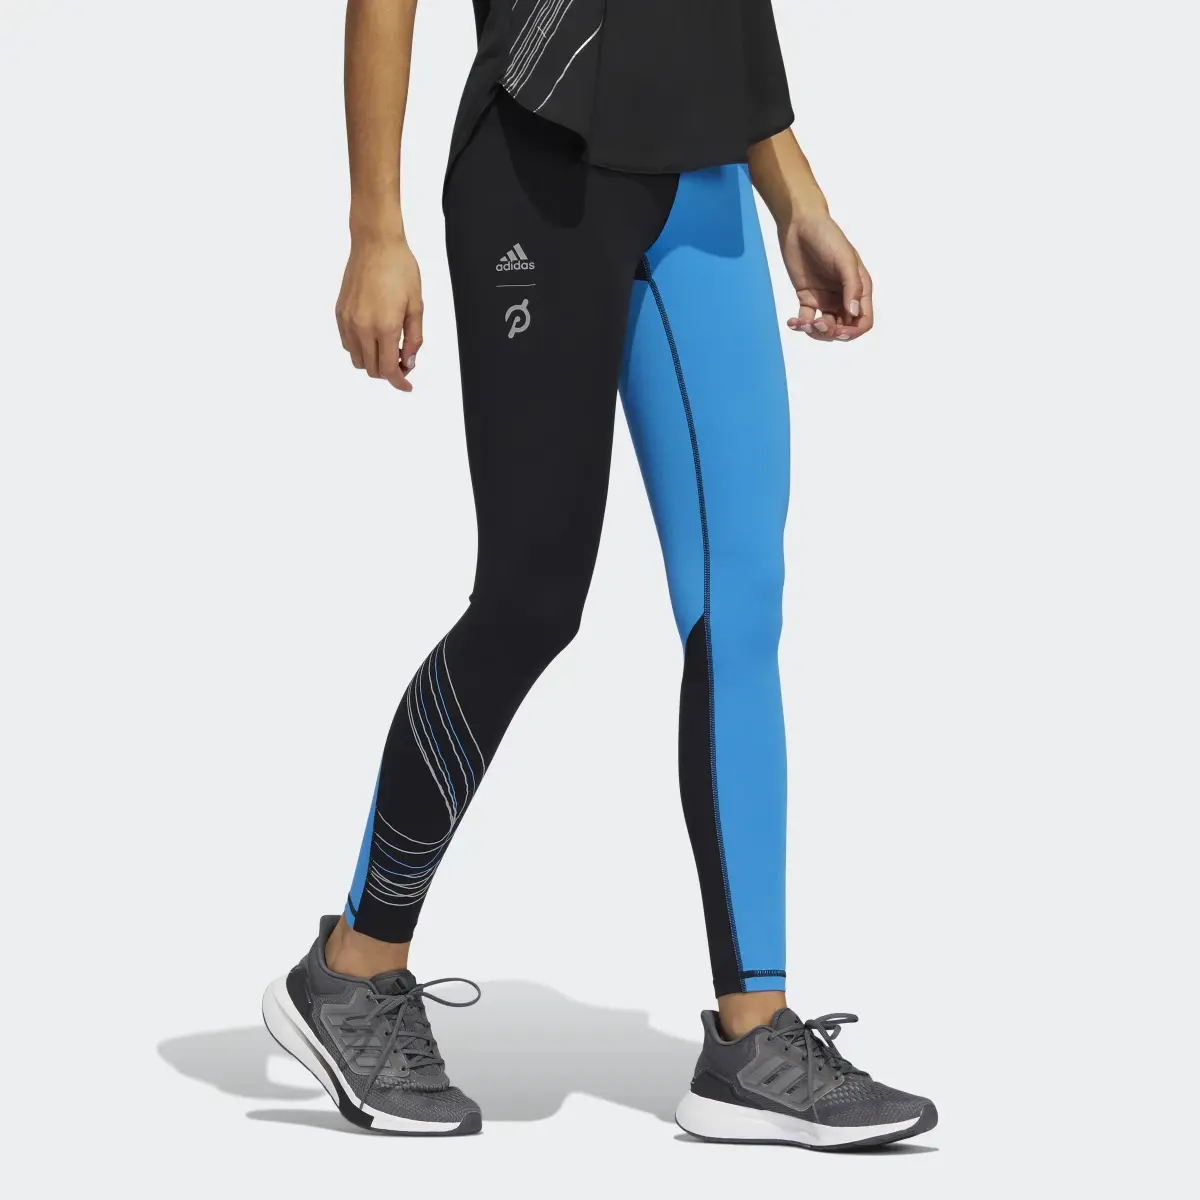 Adidas Capable of Greatness 7/8 Tights. 3